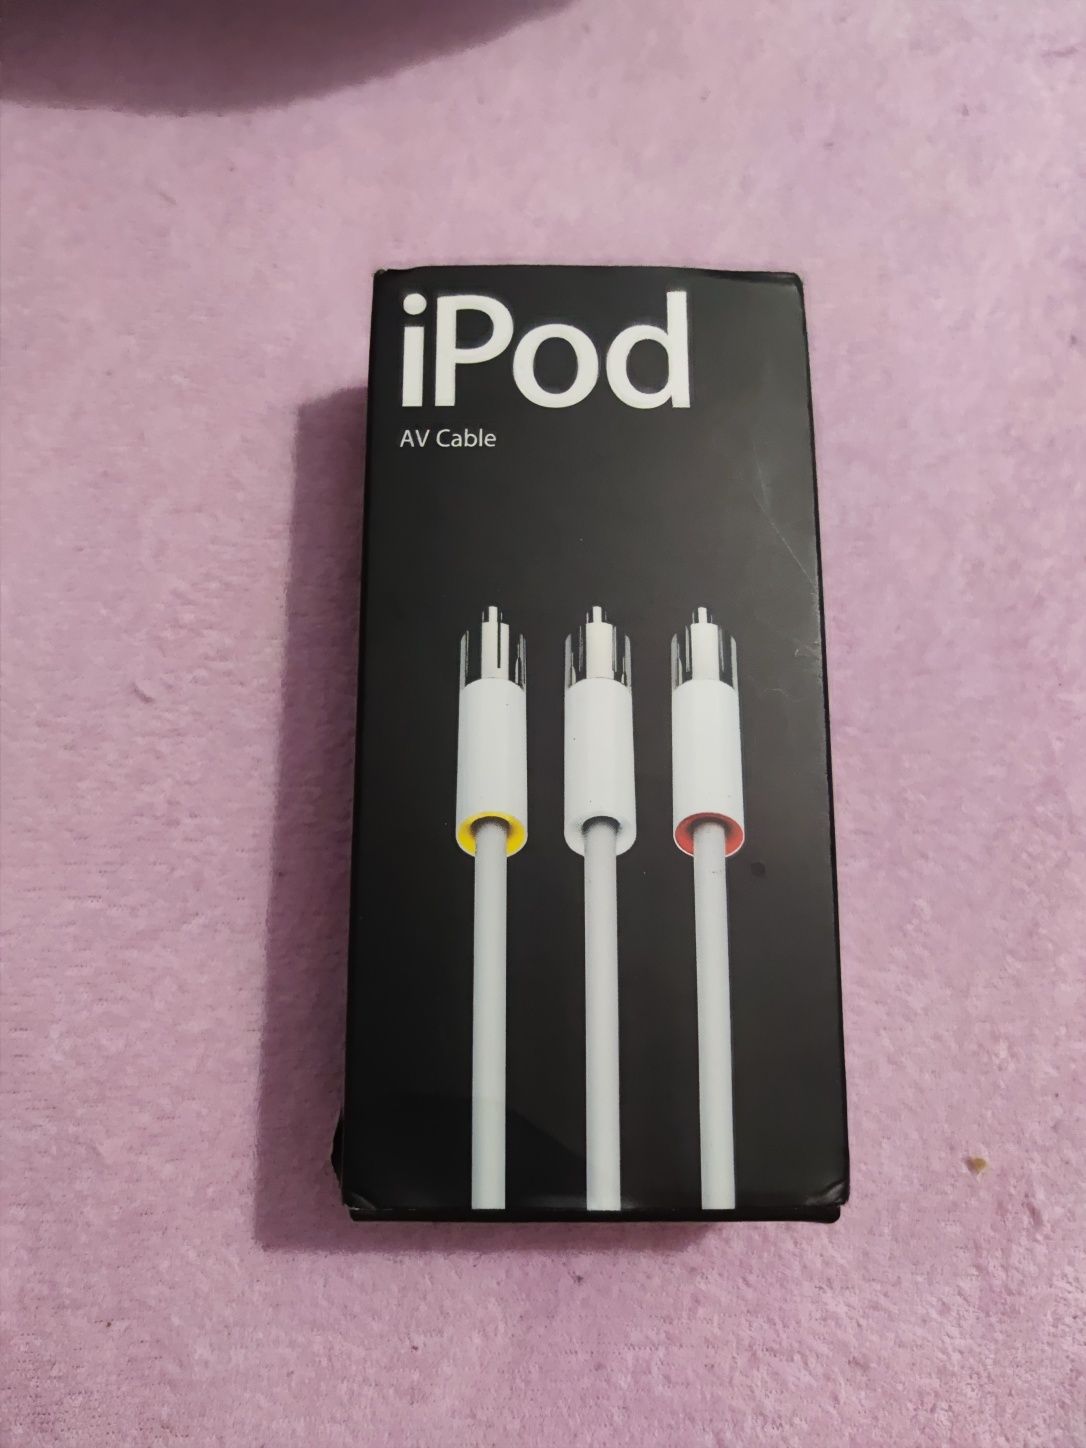 Kabel M9765G/A IPod AV cable